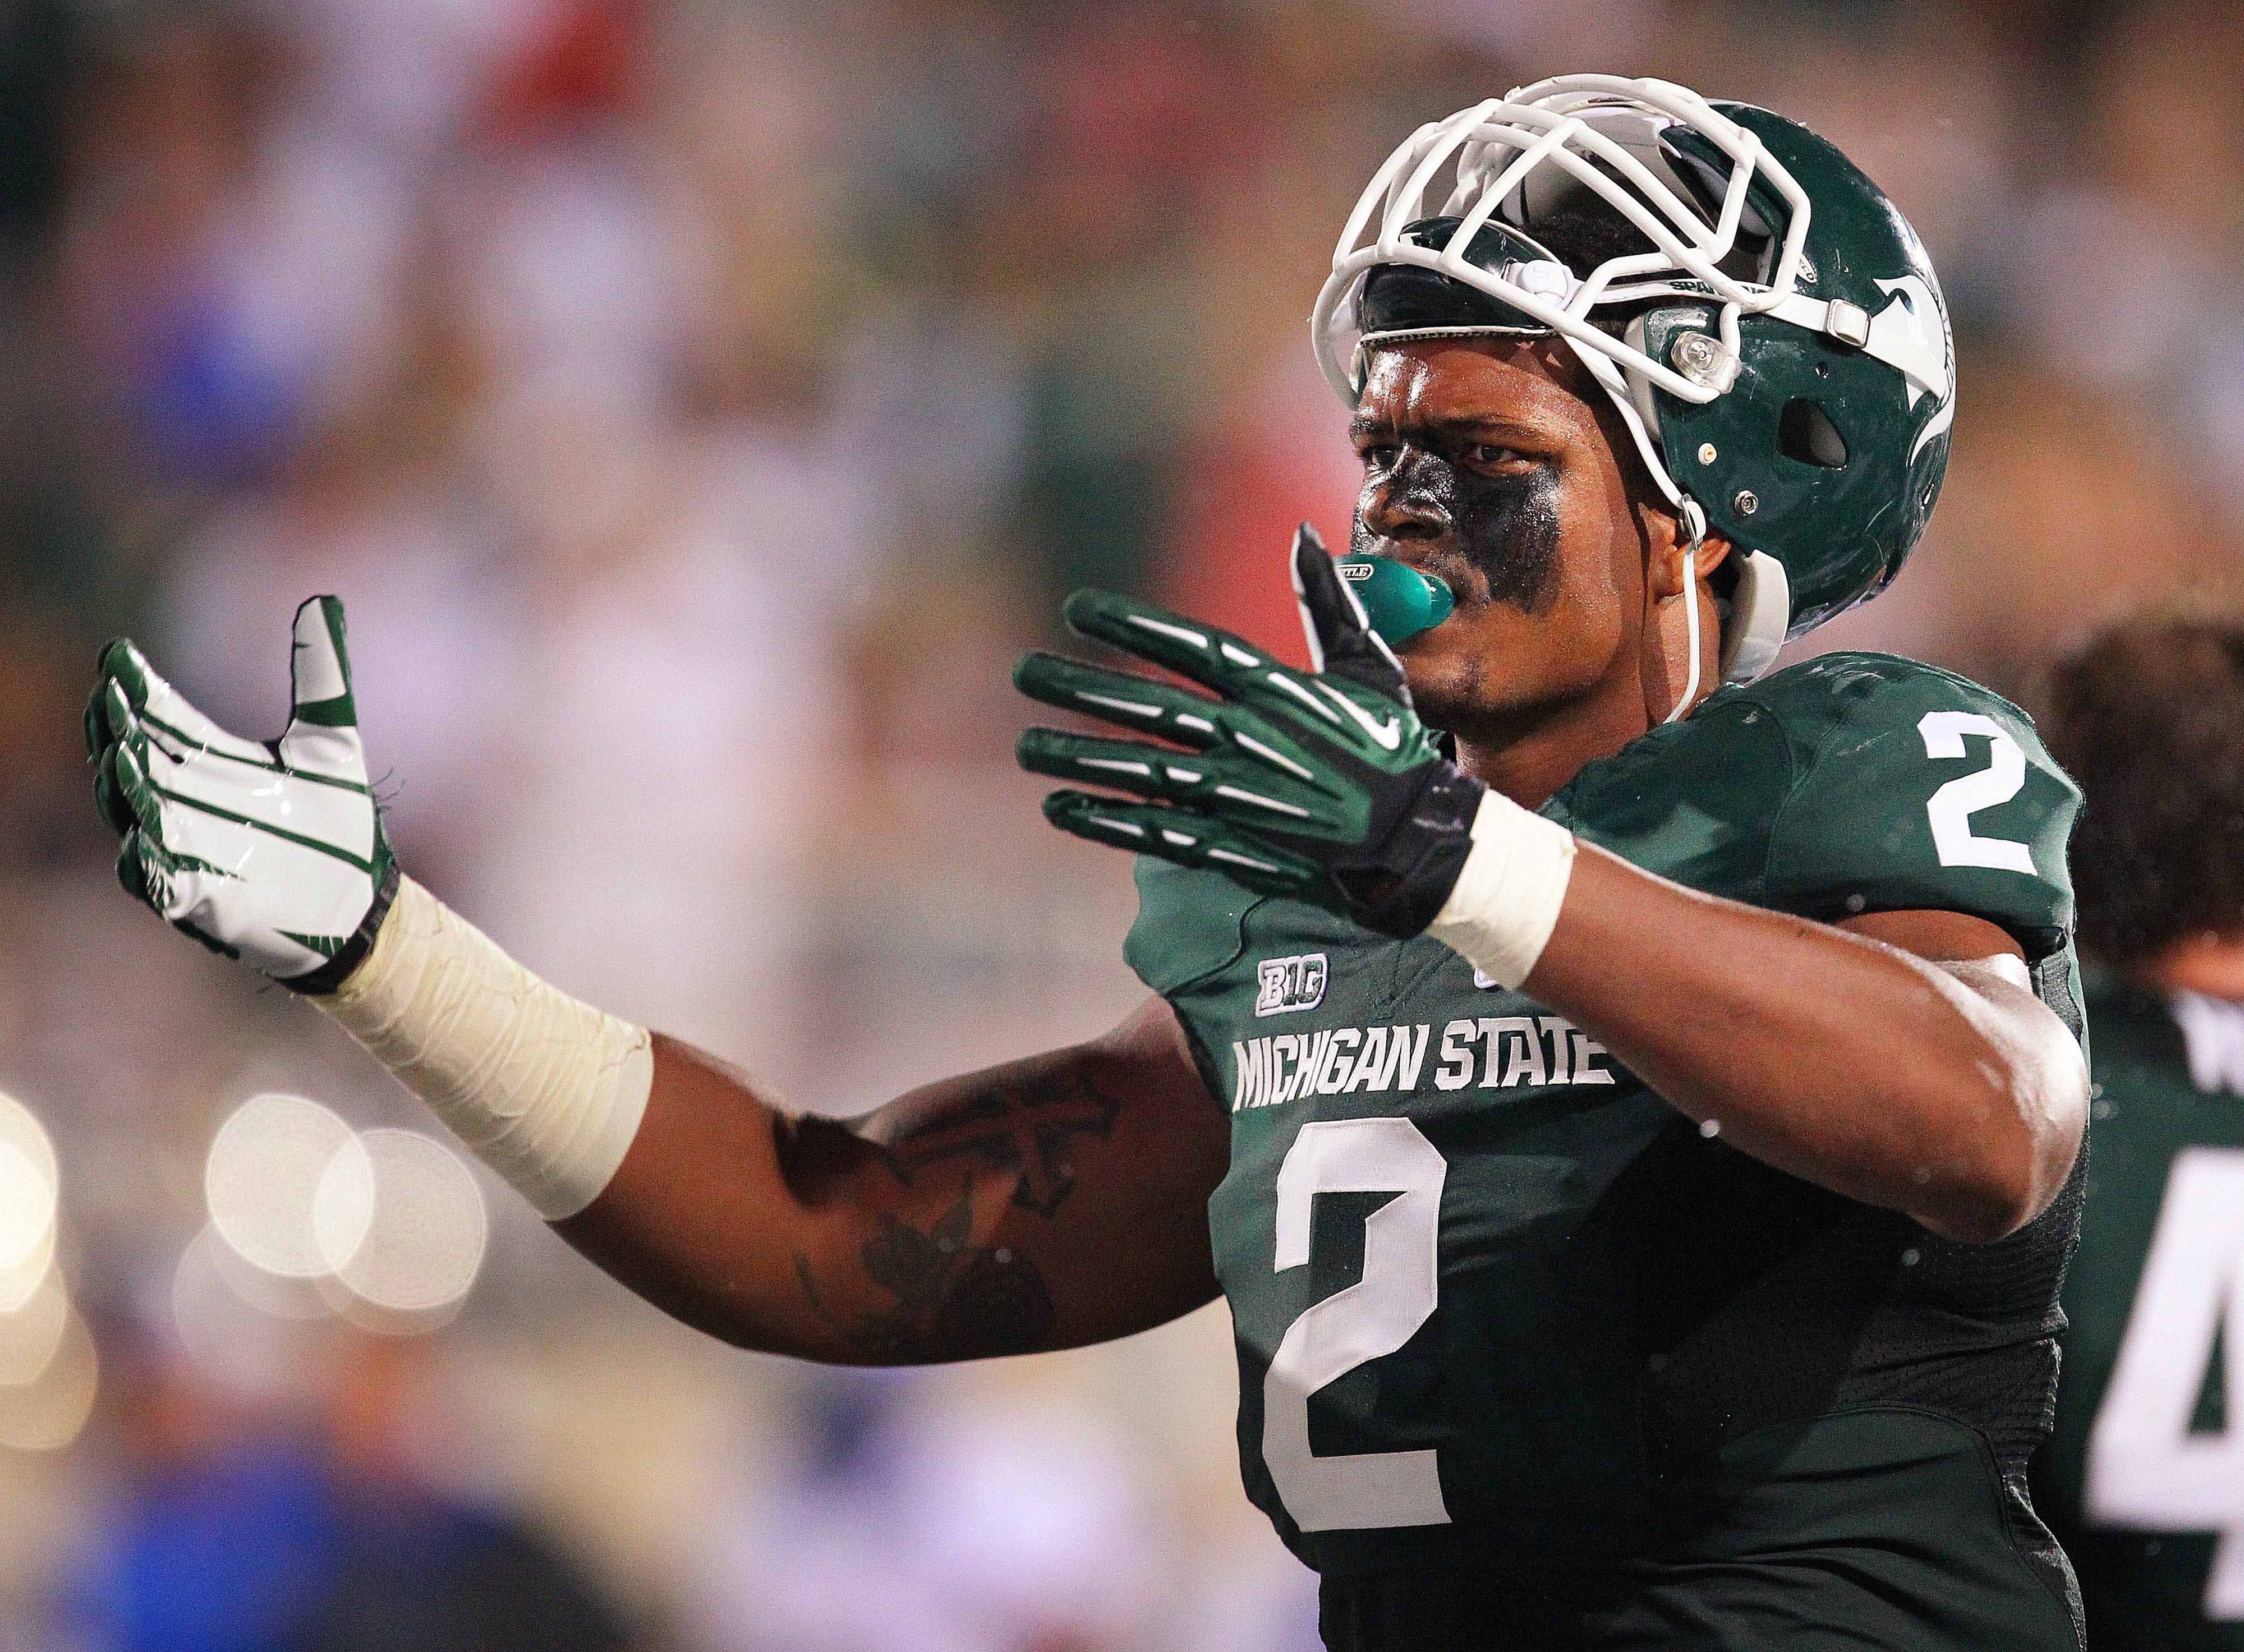 August 31, 2012; East Lansing, MI, USA; Michigan State Spartans defensive end William Gholston (2) reacts after call during the second half at Spartan Stadium. MSU won 17-13    Mandatory Credit: Mike Carter-US PRESSWIRE